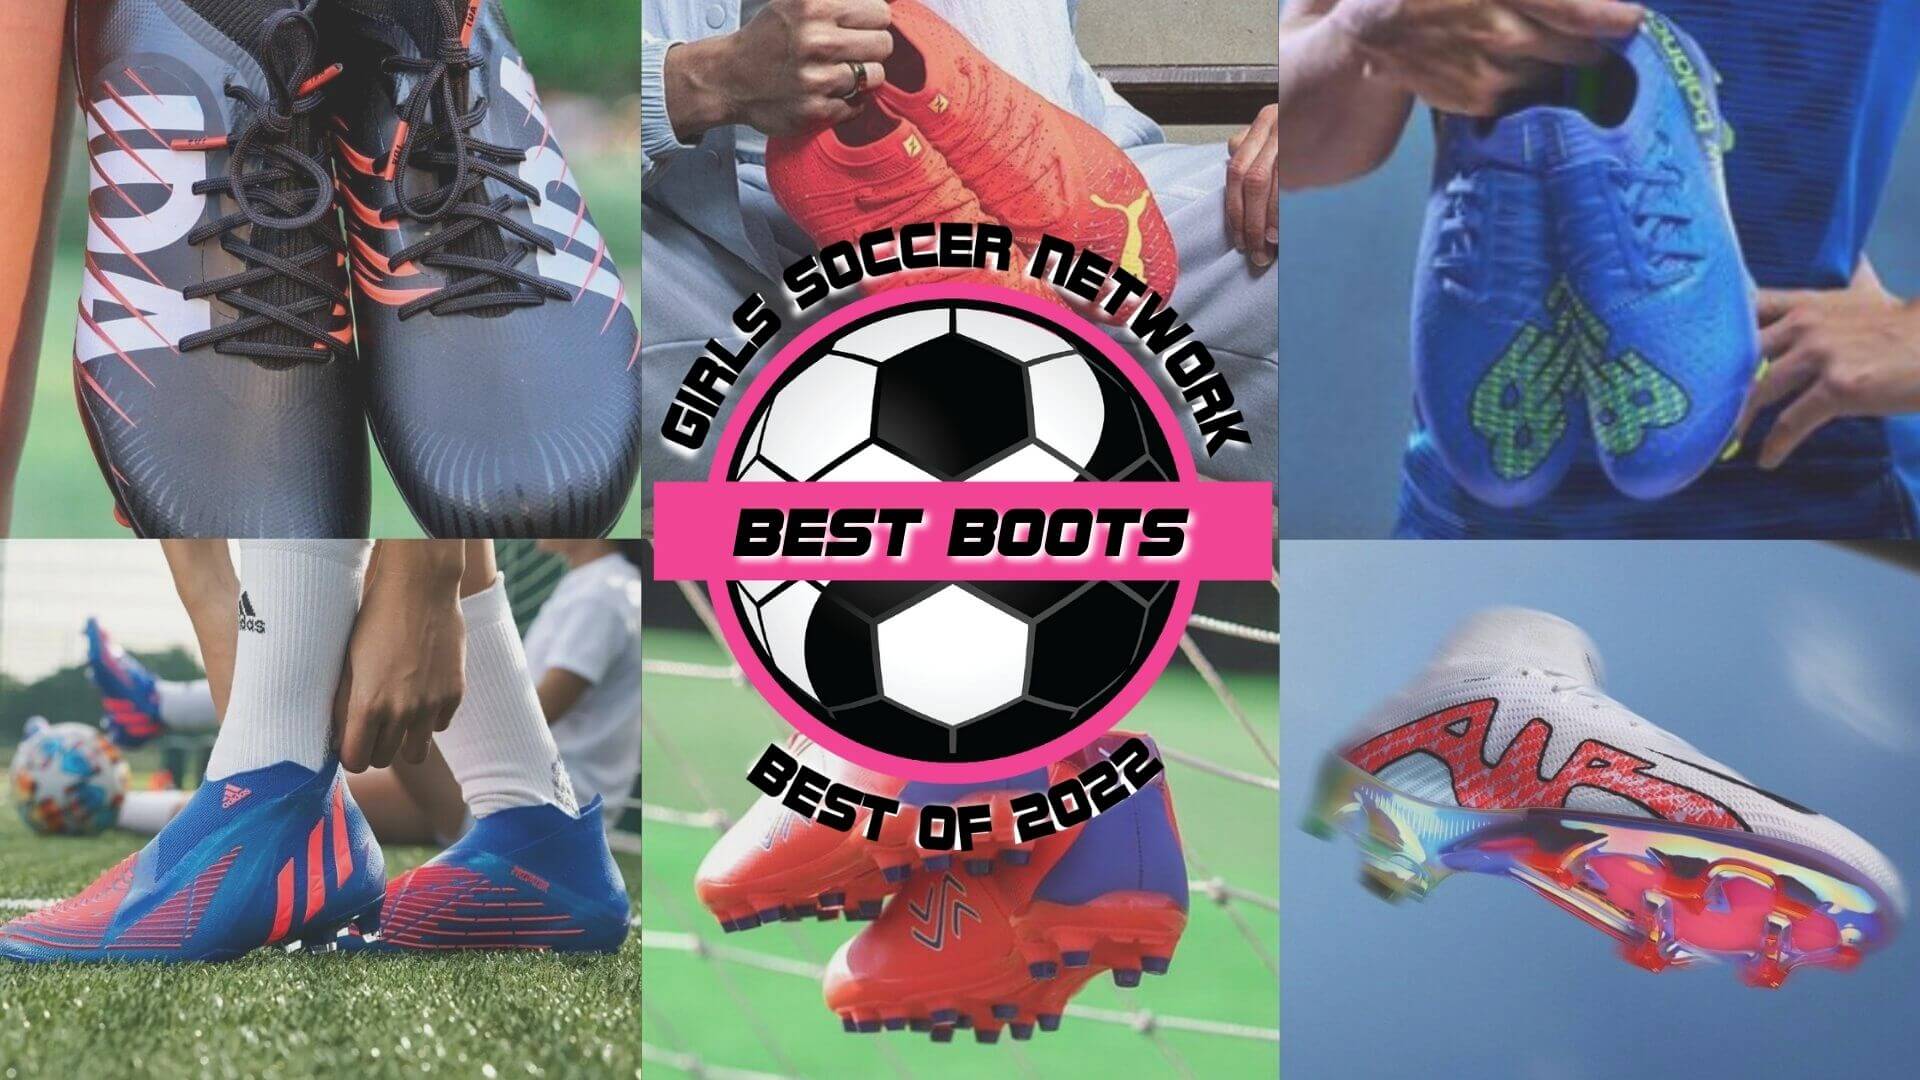 GSN's top picks for cleats this year